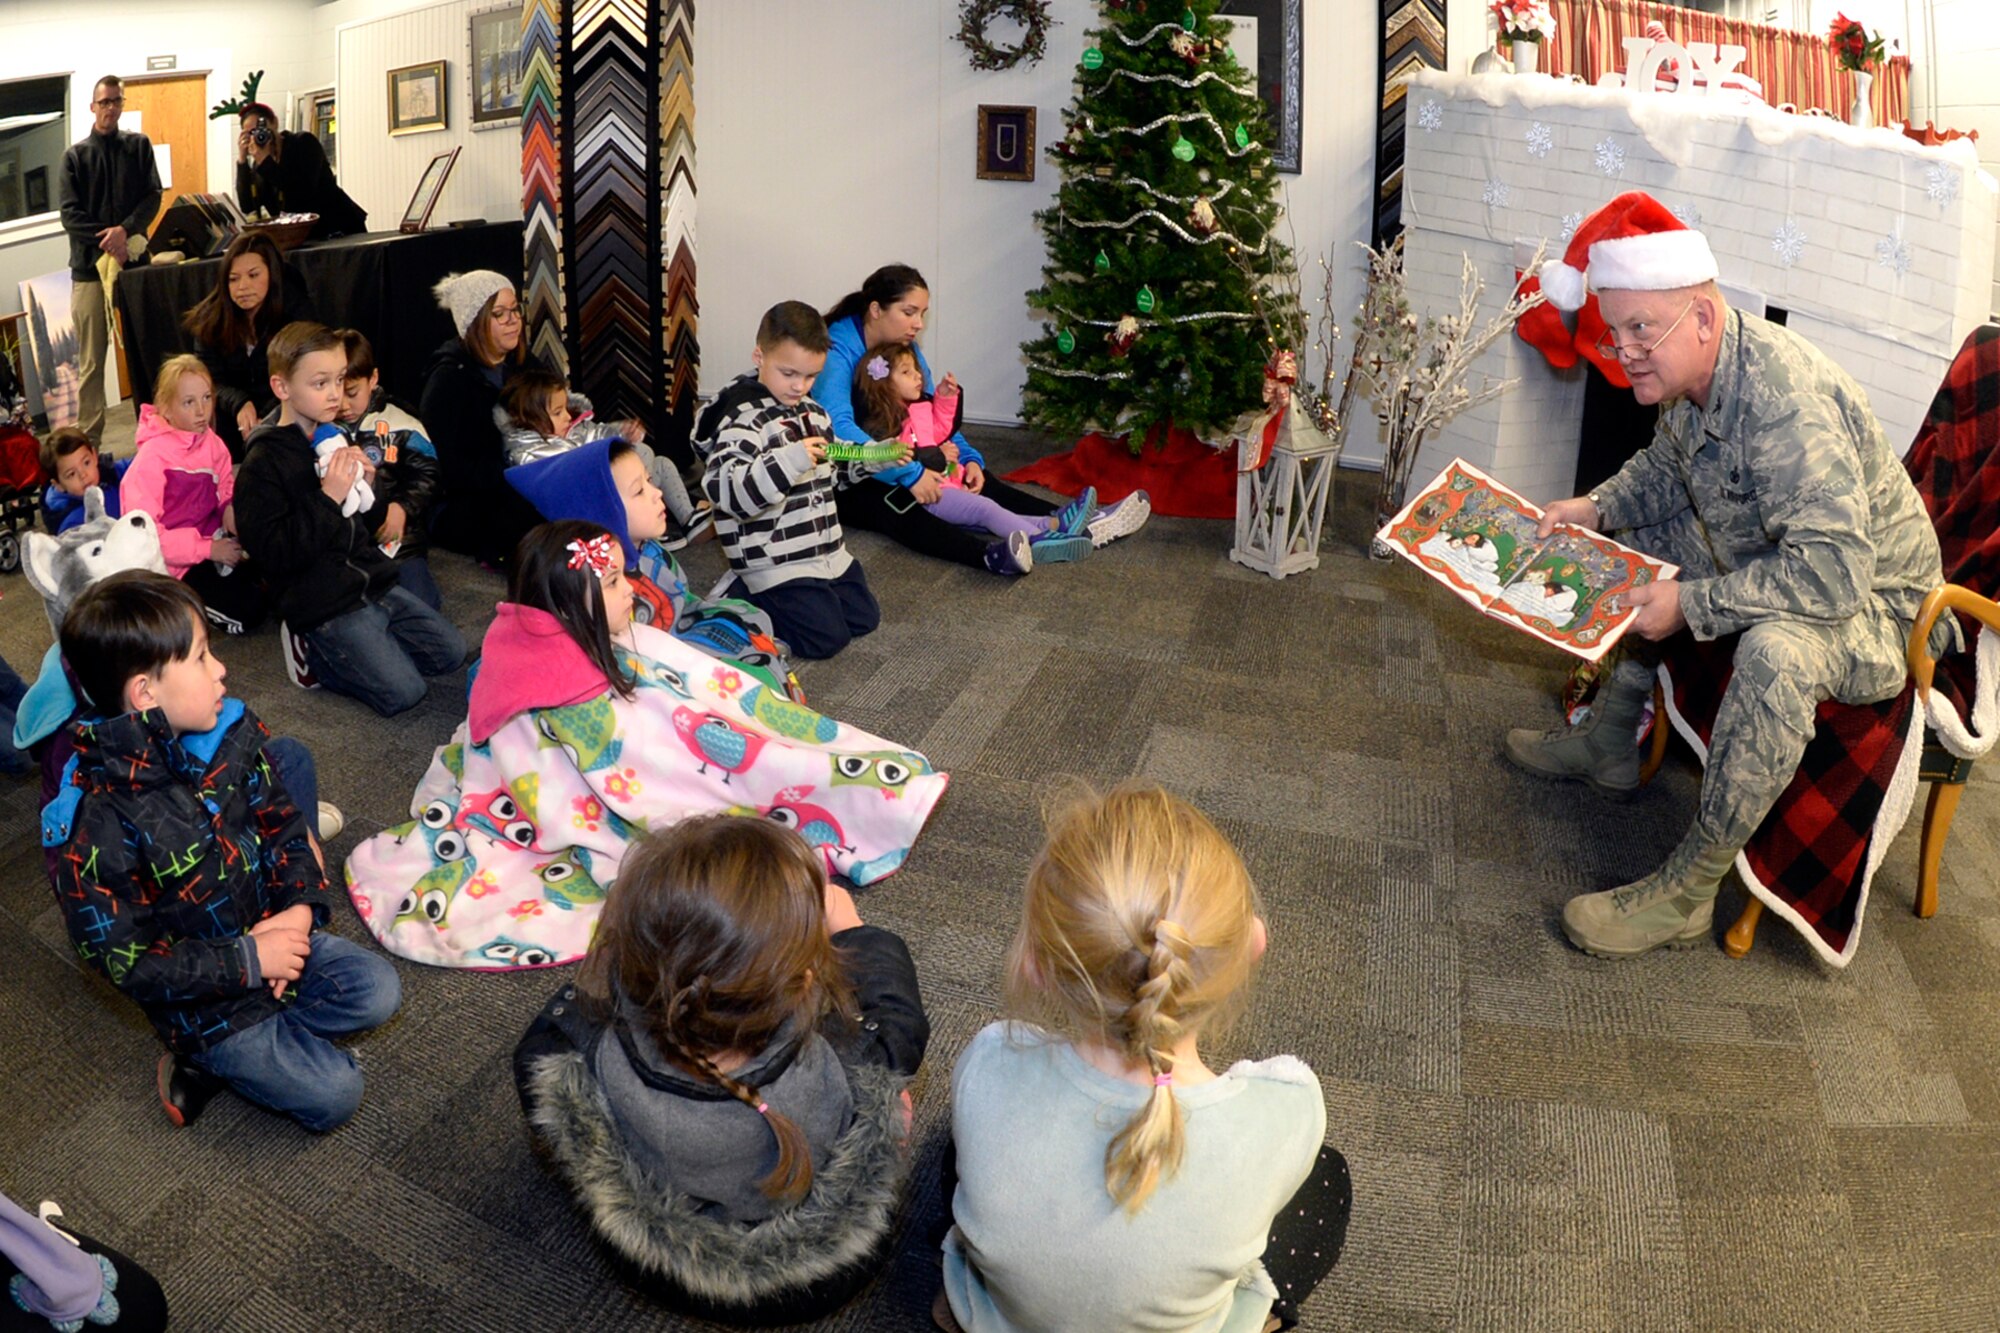 CHILDREN JOIN SANTA TO BRING IN THE HOLIDAYS